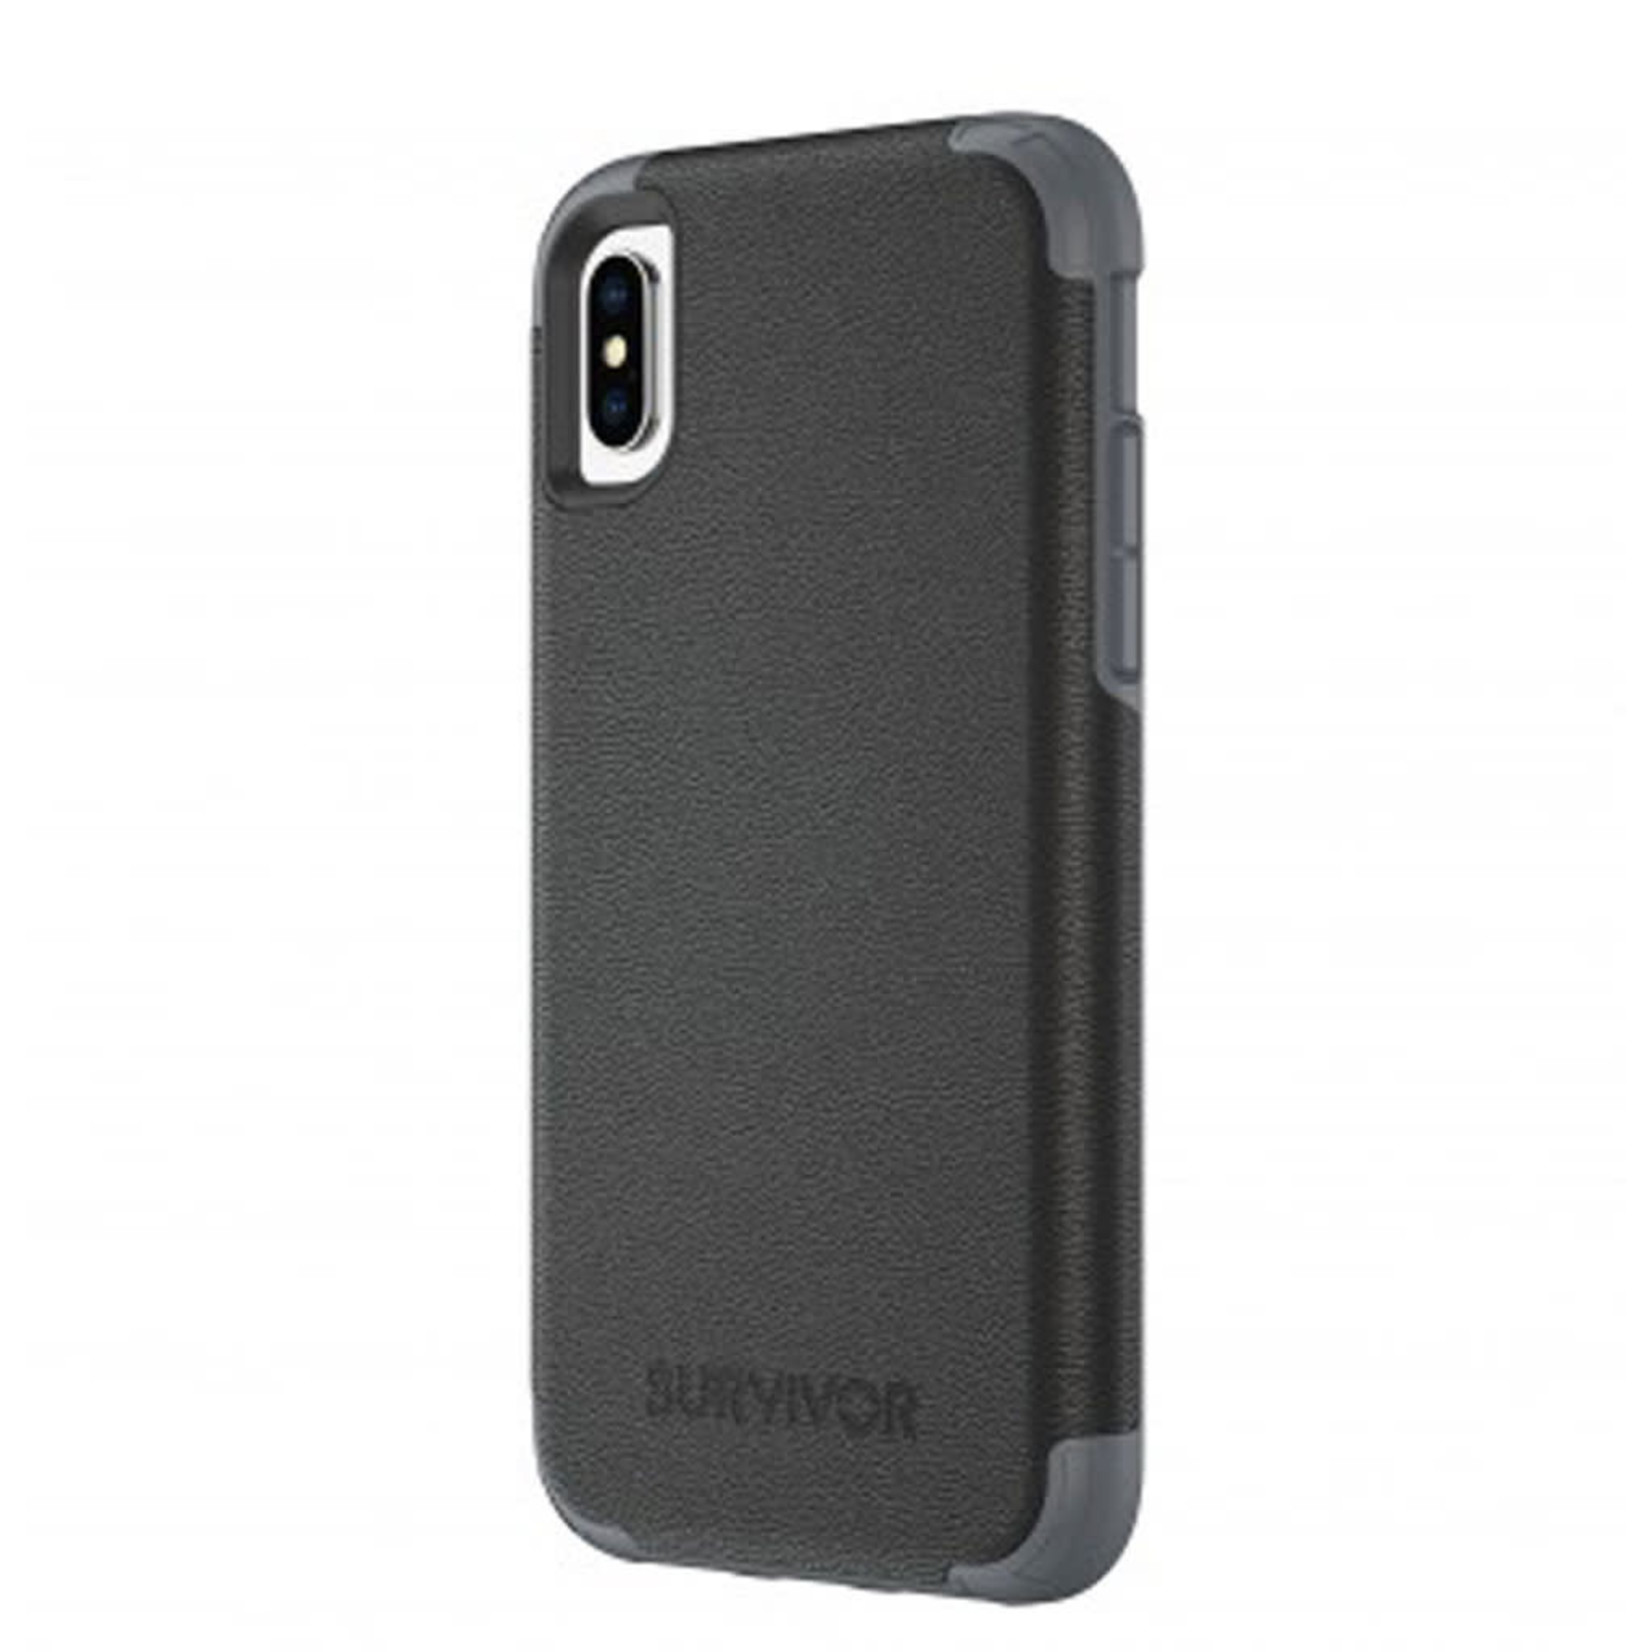 SURVIVOR Prime Case with Impact Protection Case for iPhone X / XS